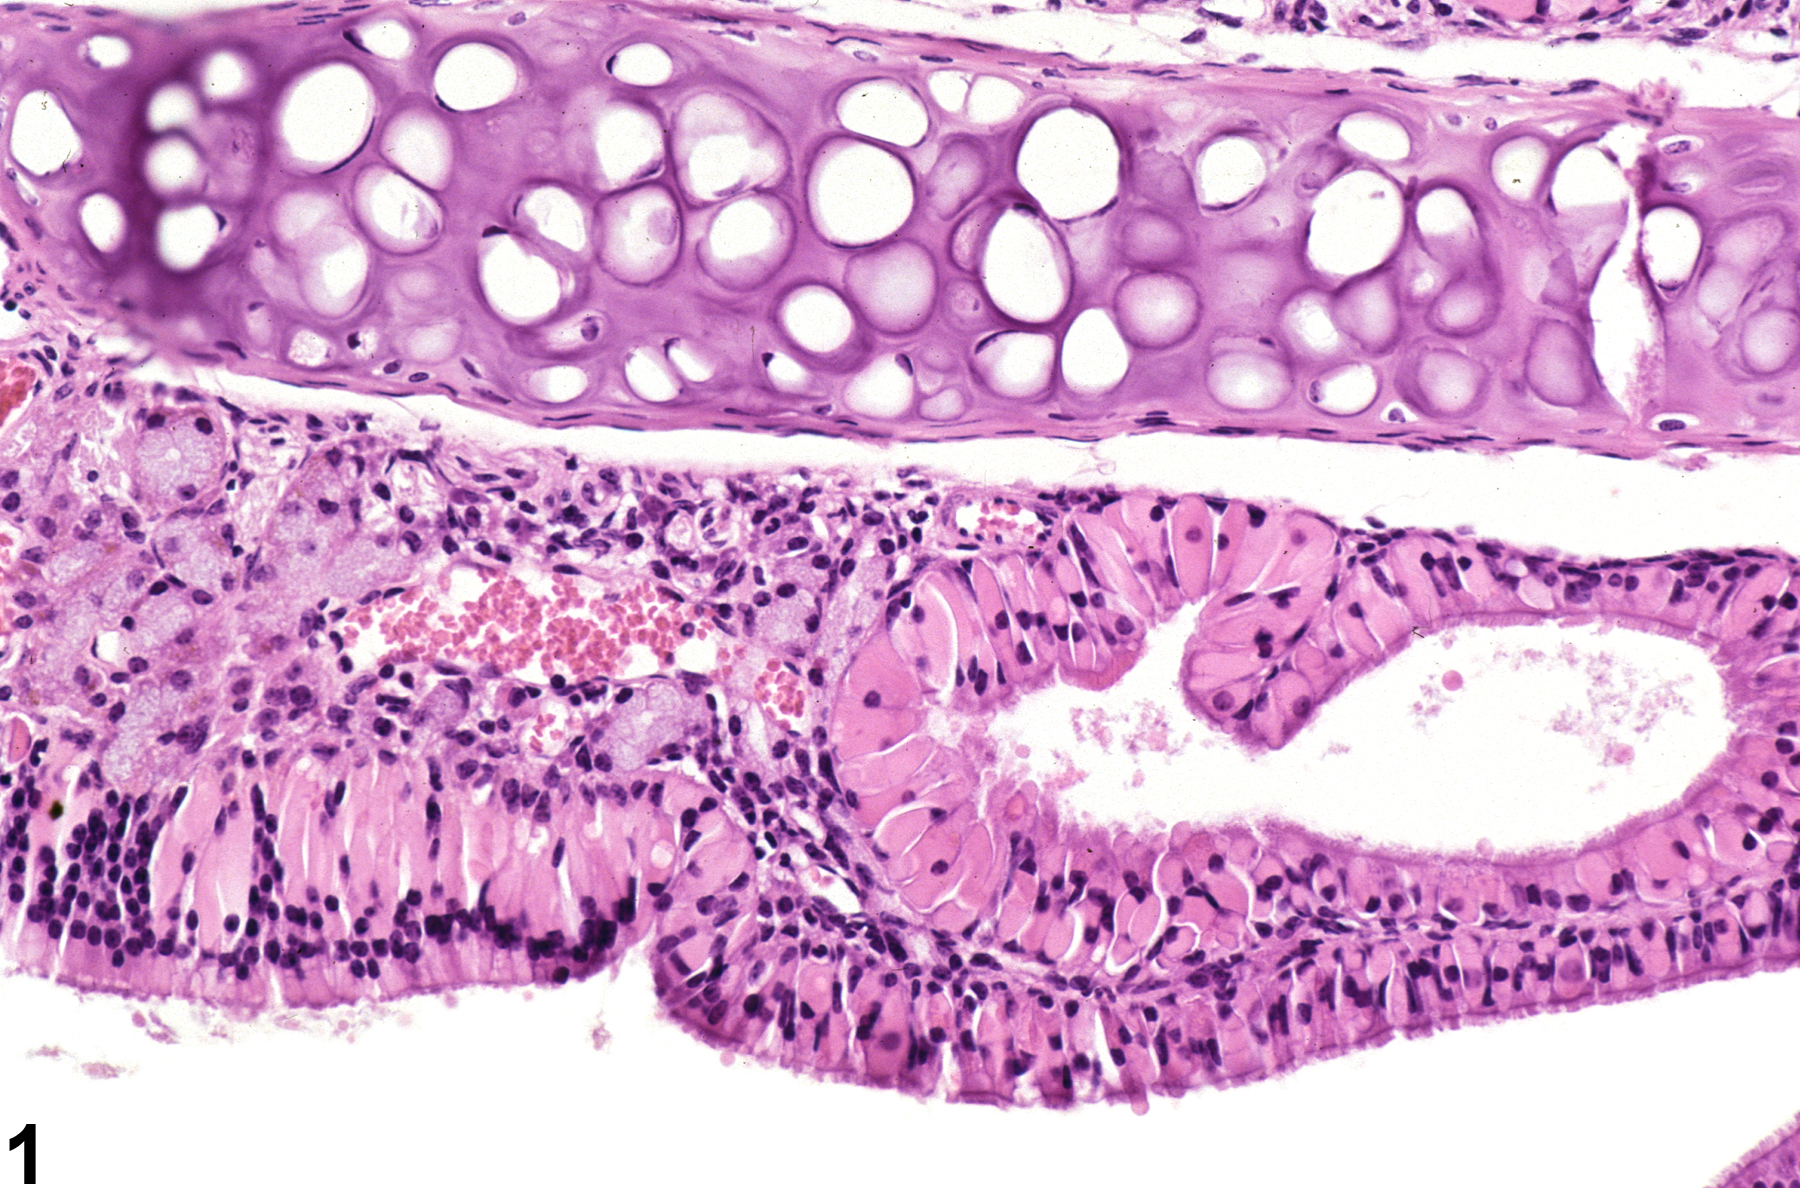 Image of accumulation, hyaline droplet in the nose, respiratory epithelium from a female B6C3F1/N mouse in a chronic study